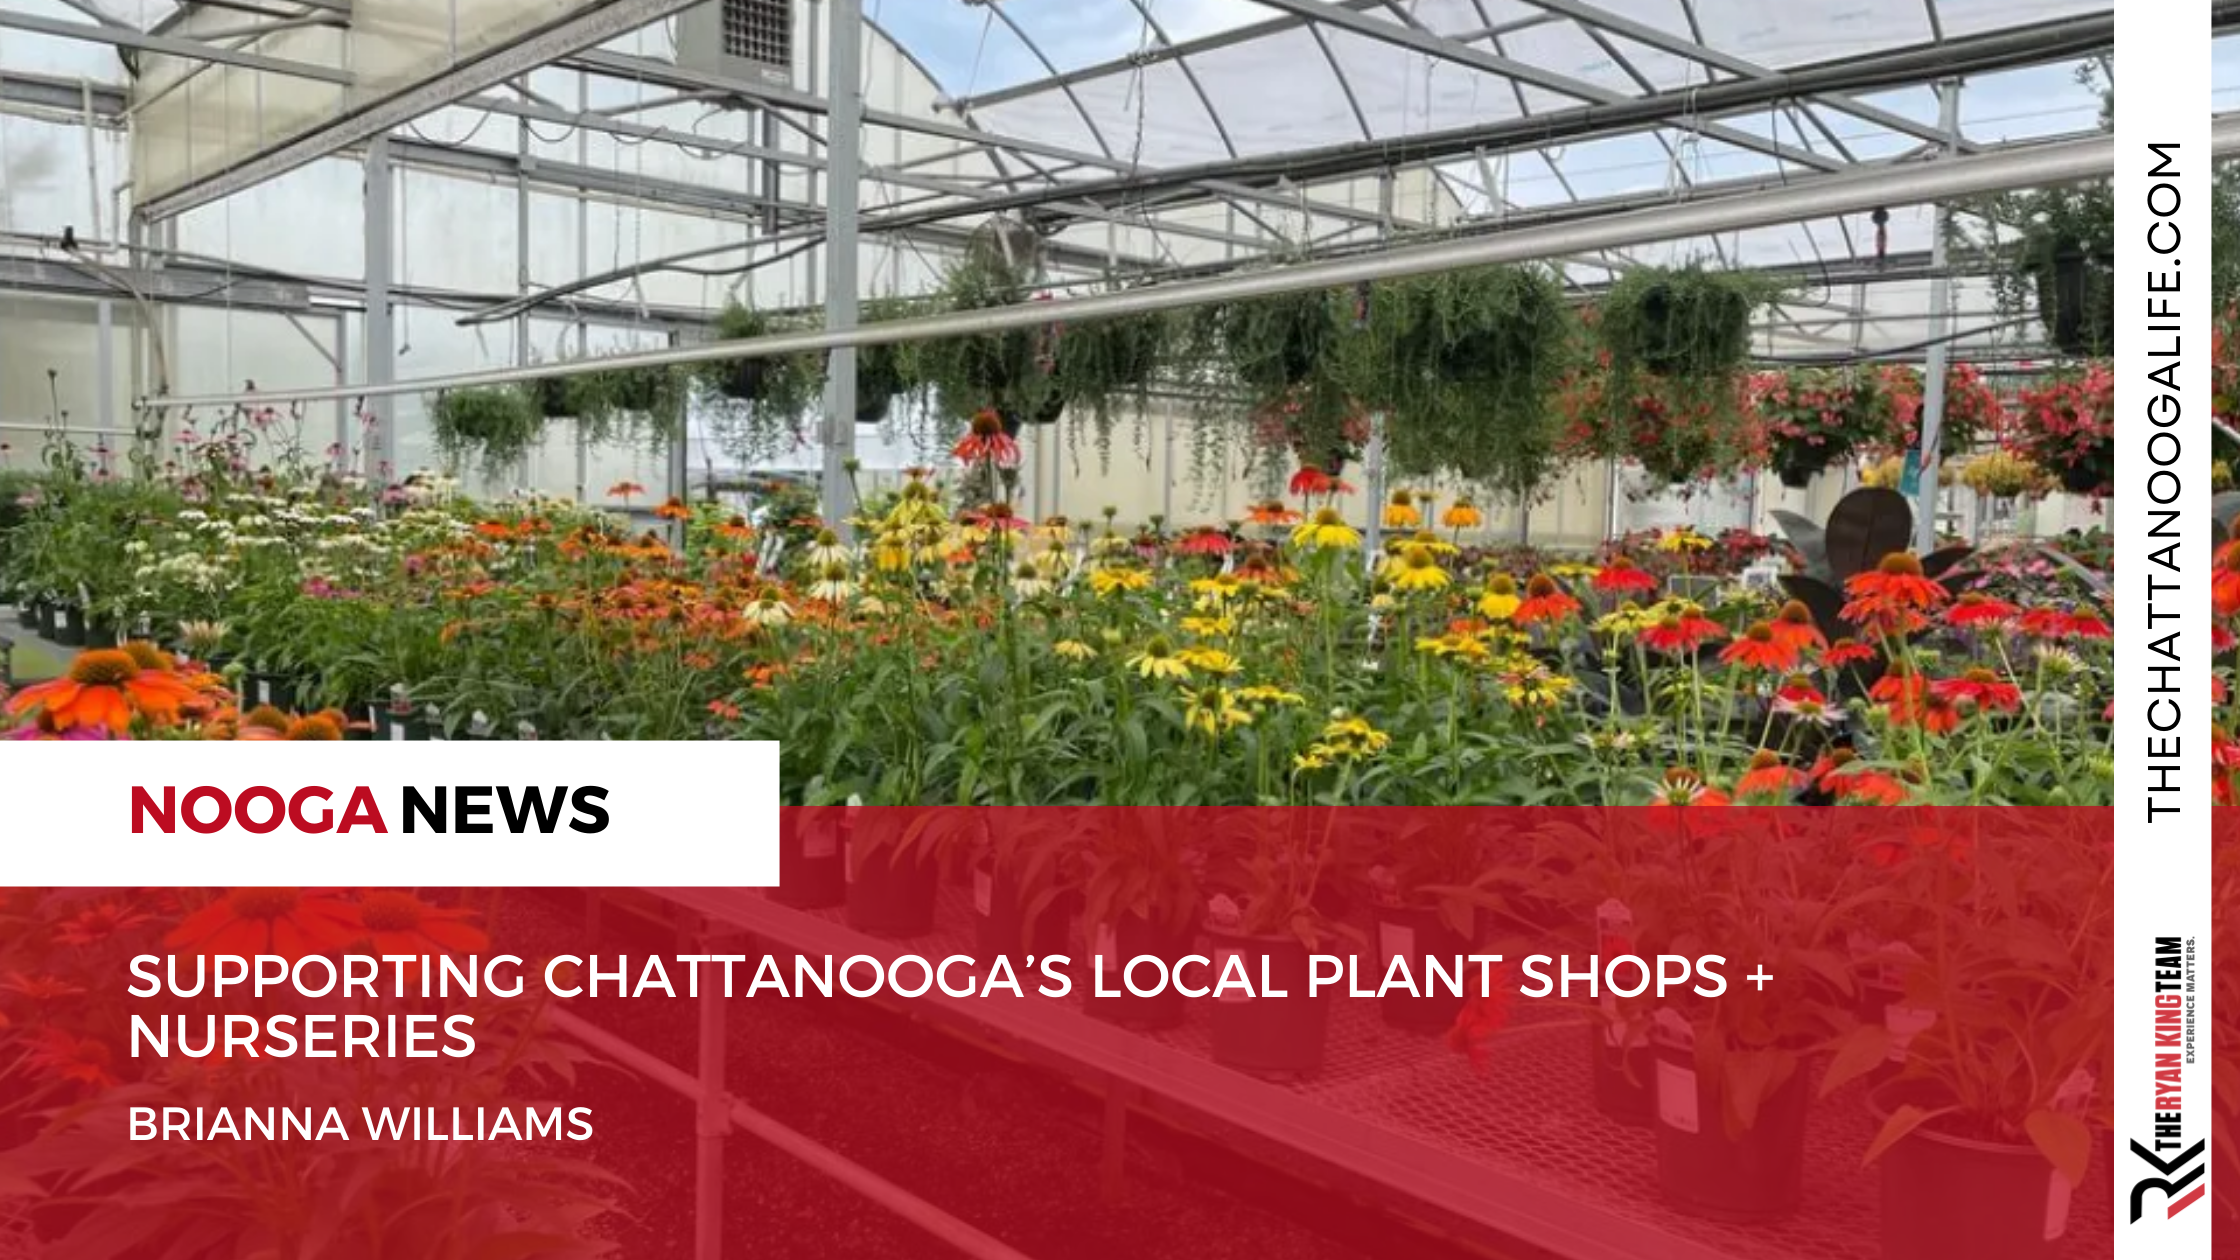 Supporting Chattanooga’s local plant shops + nurseries